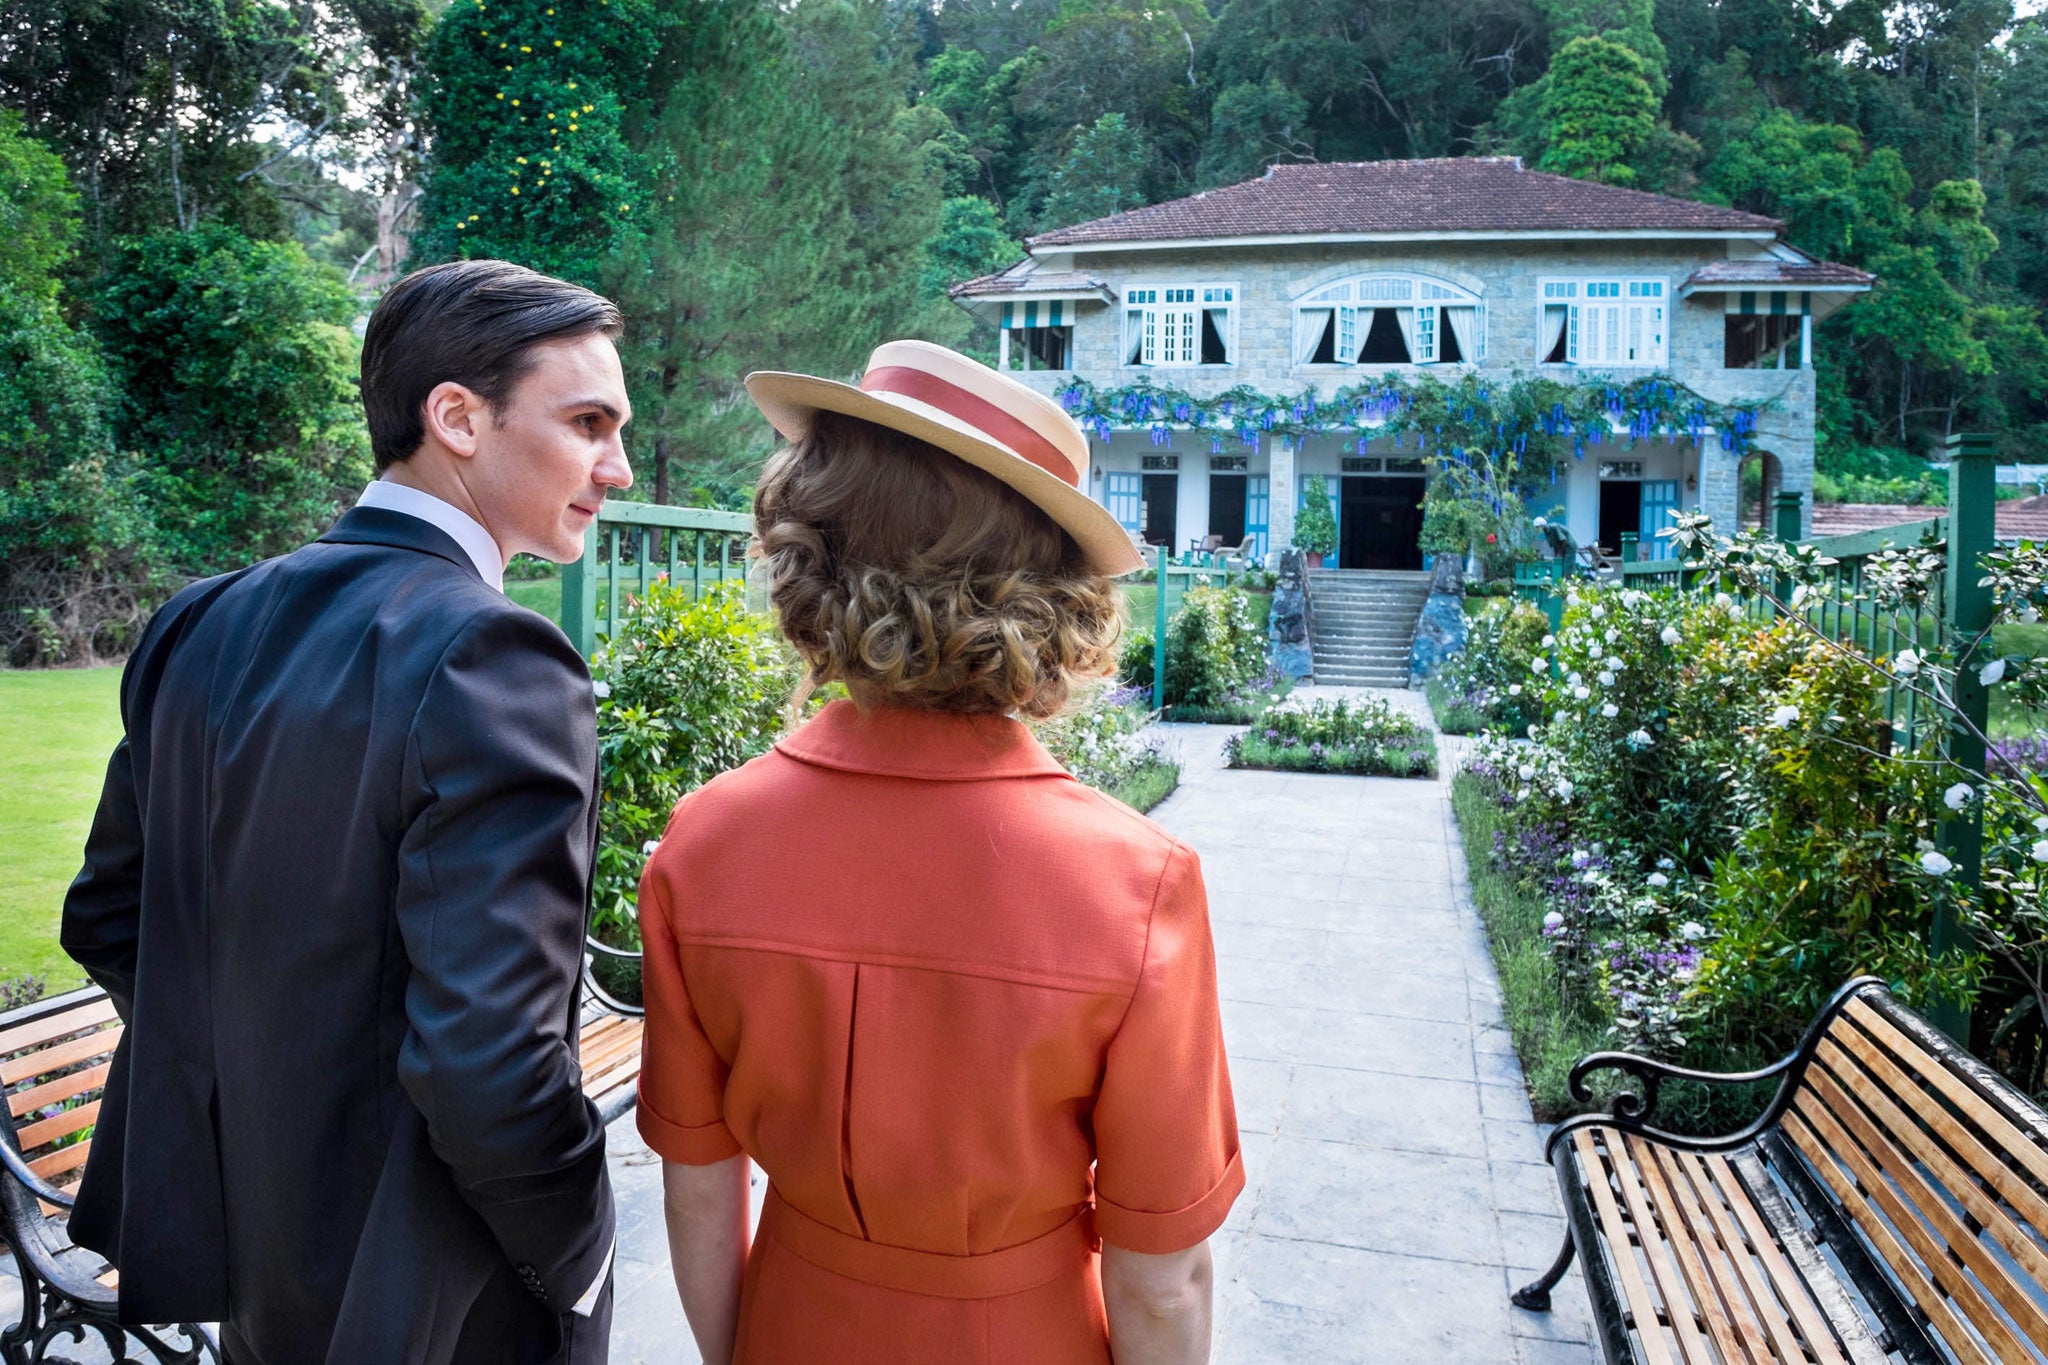 Indian Summers is the most expensive drama in Channel 4's history